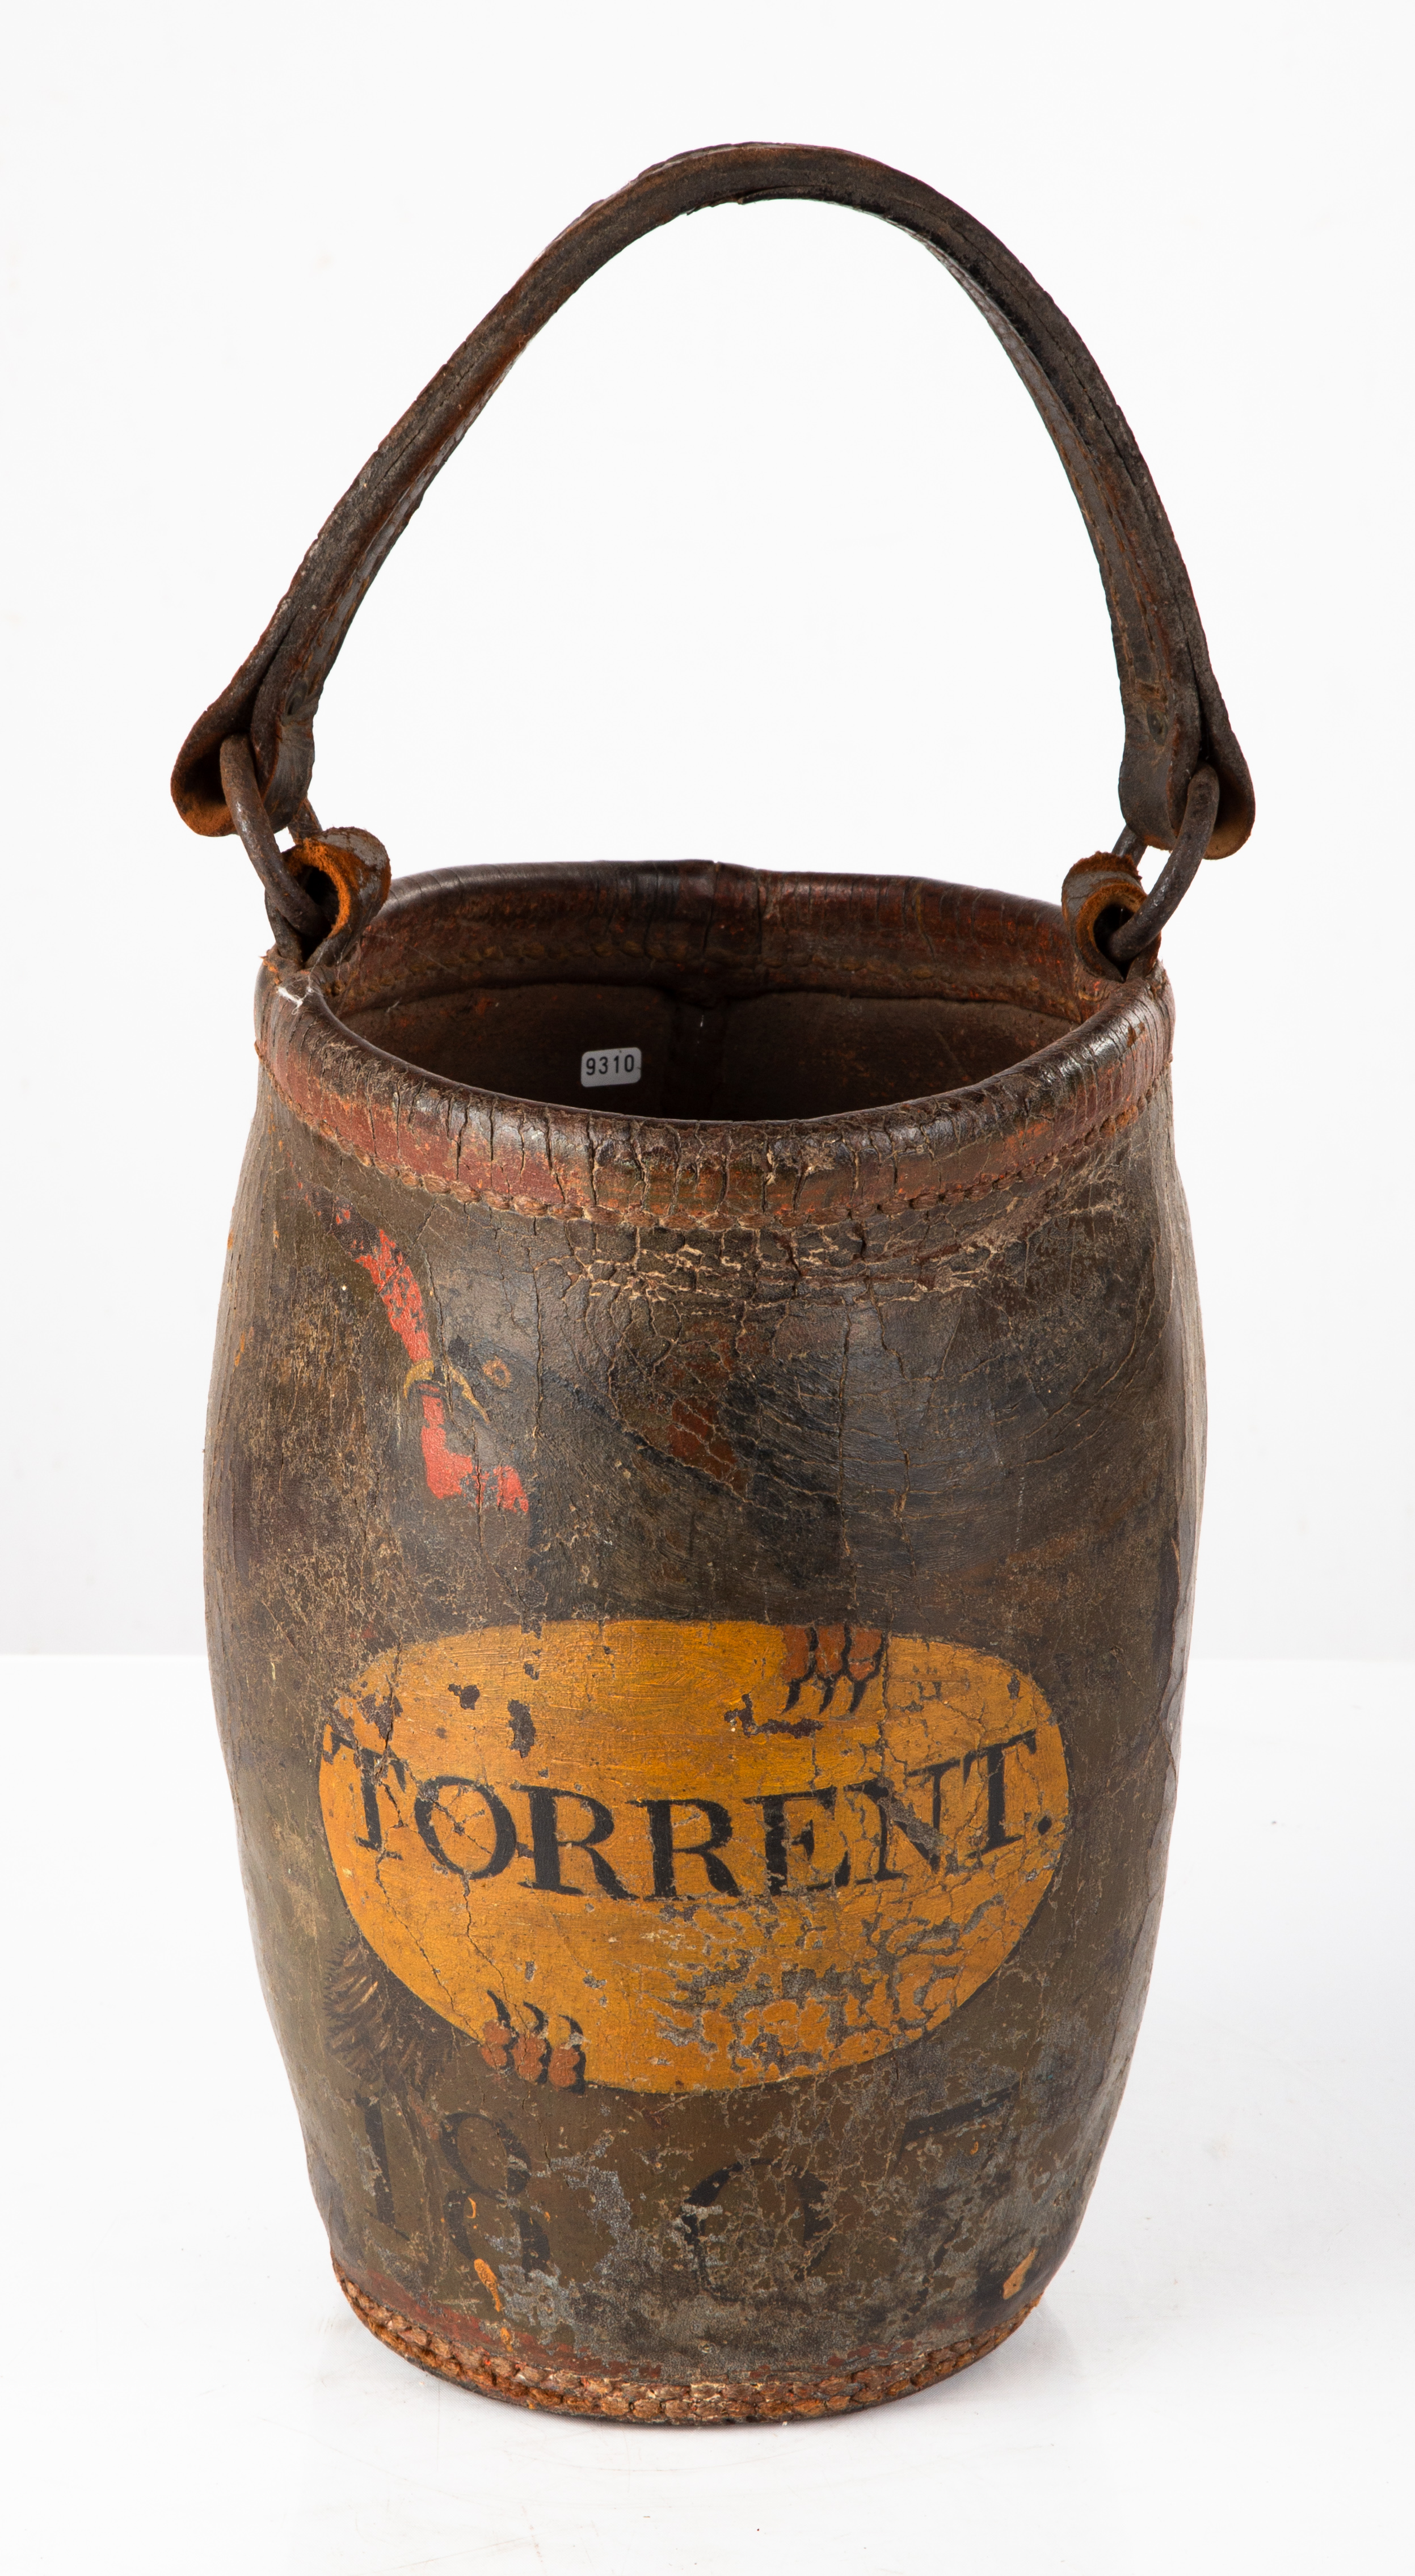 EARLY 19TH CENTURY LEATHER FIREMAN'S